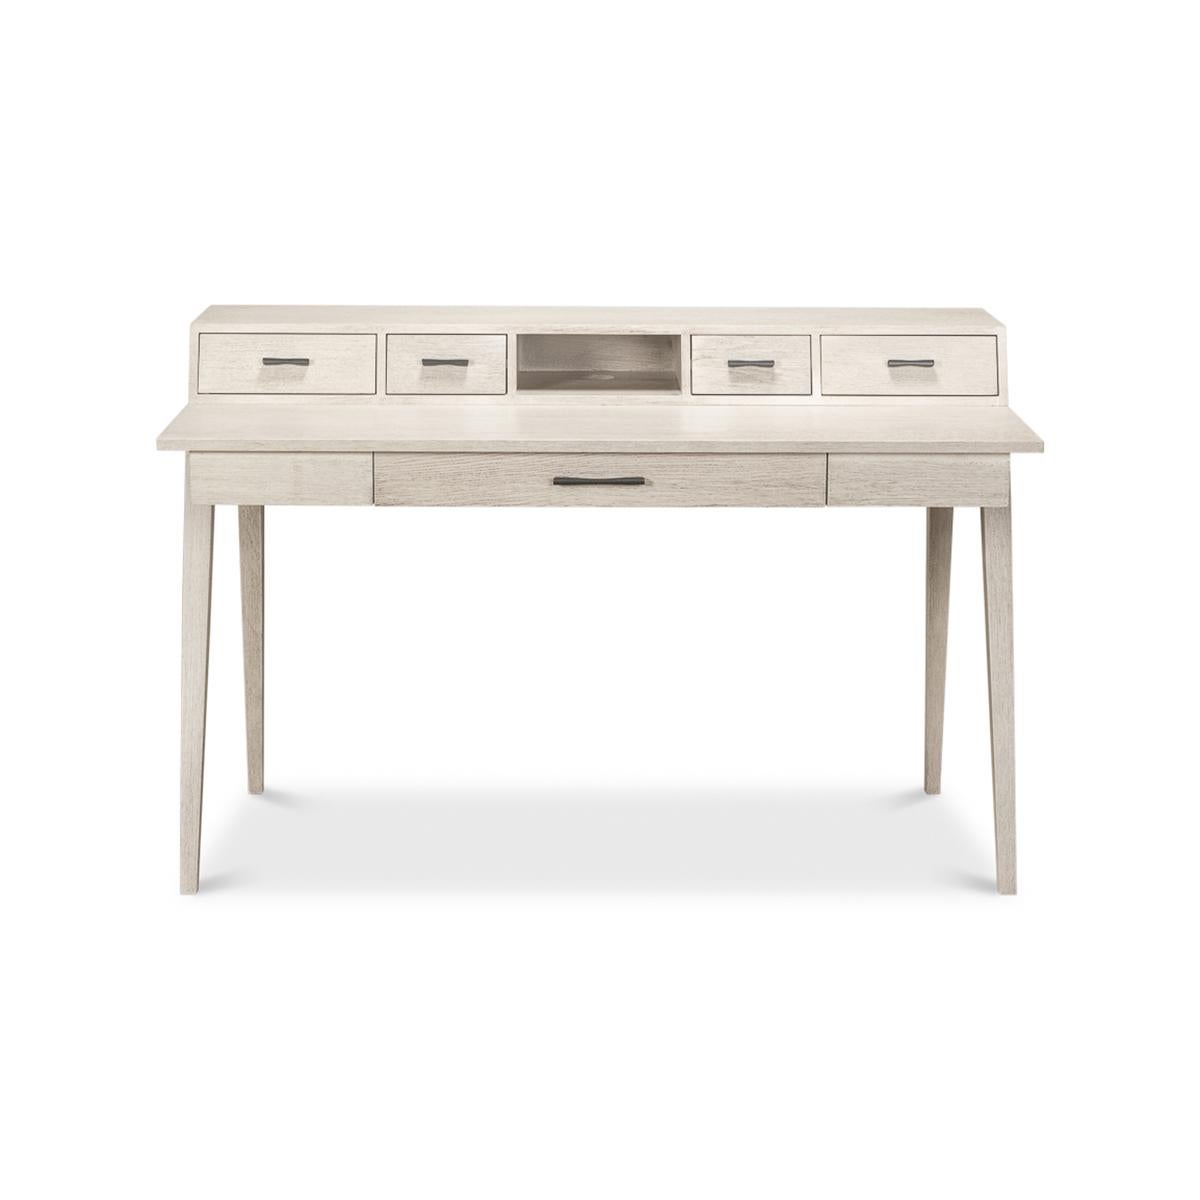 Scandinavian Modern Desk, an ivory finish to this modern writing table that has an angled superstructure with drawers above a rectangular writing surface and with one long frieze drawer and raised on angled square tapered legs.

Dimensions: 54